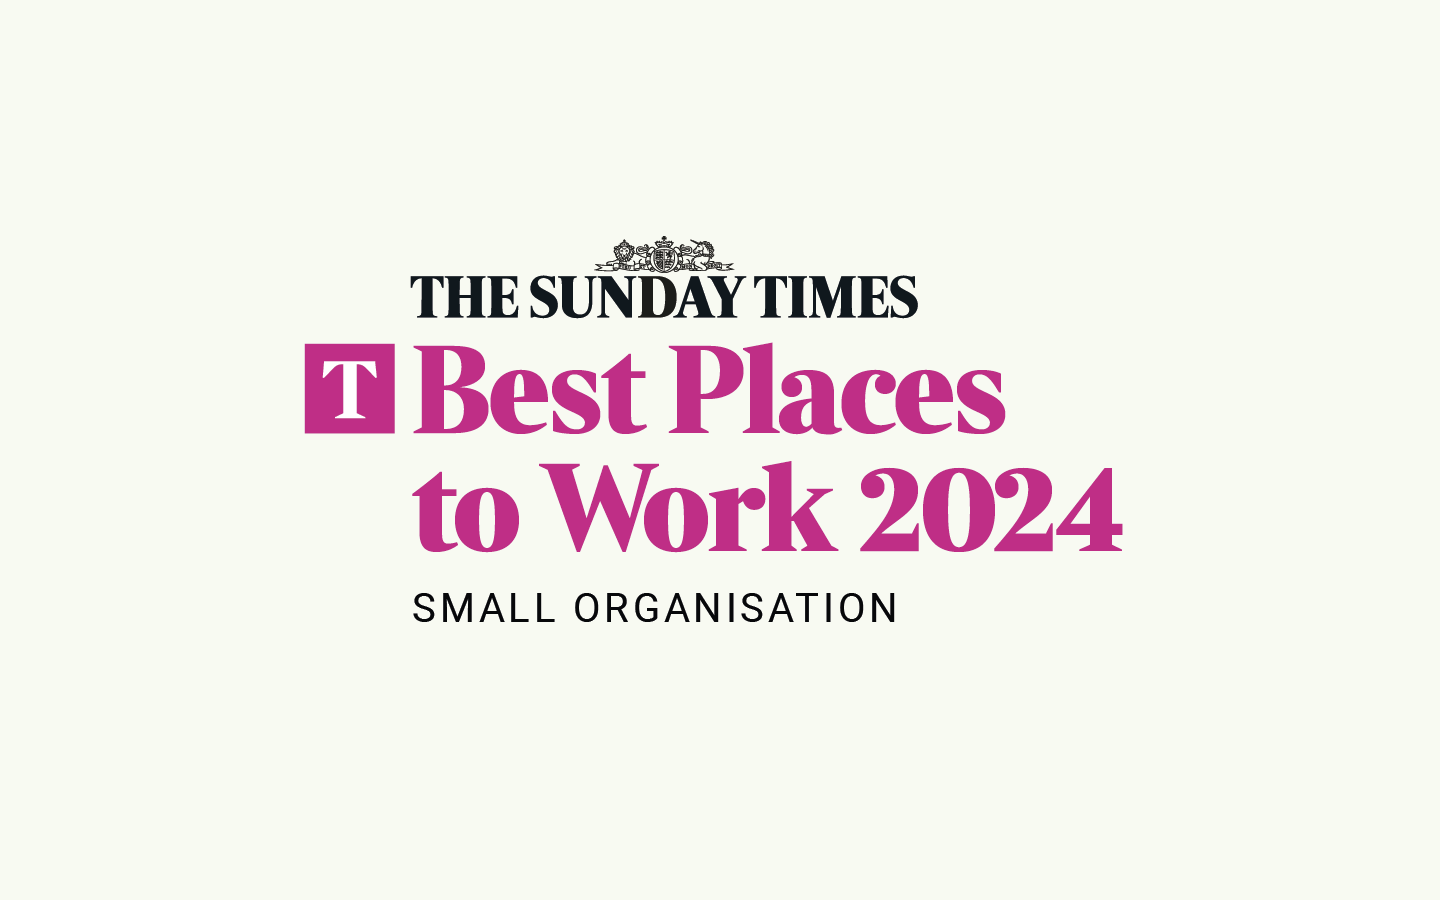 The Sunday Times Best places to Work 2024